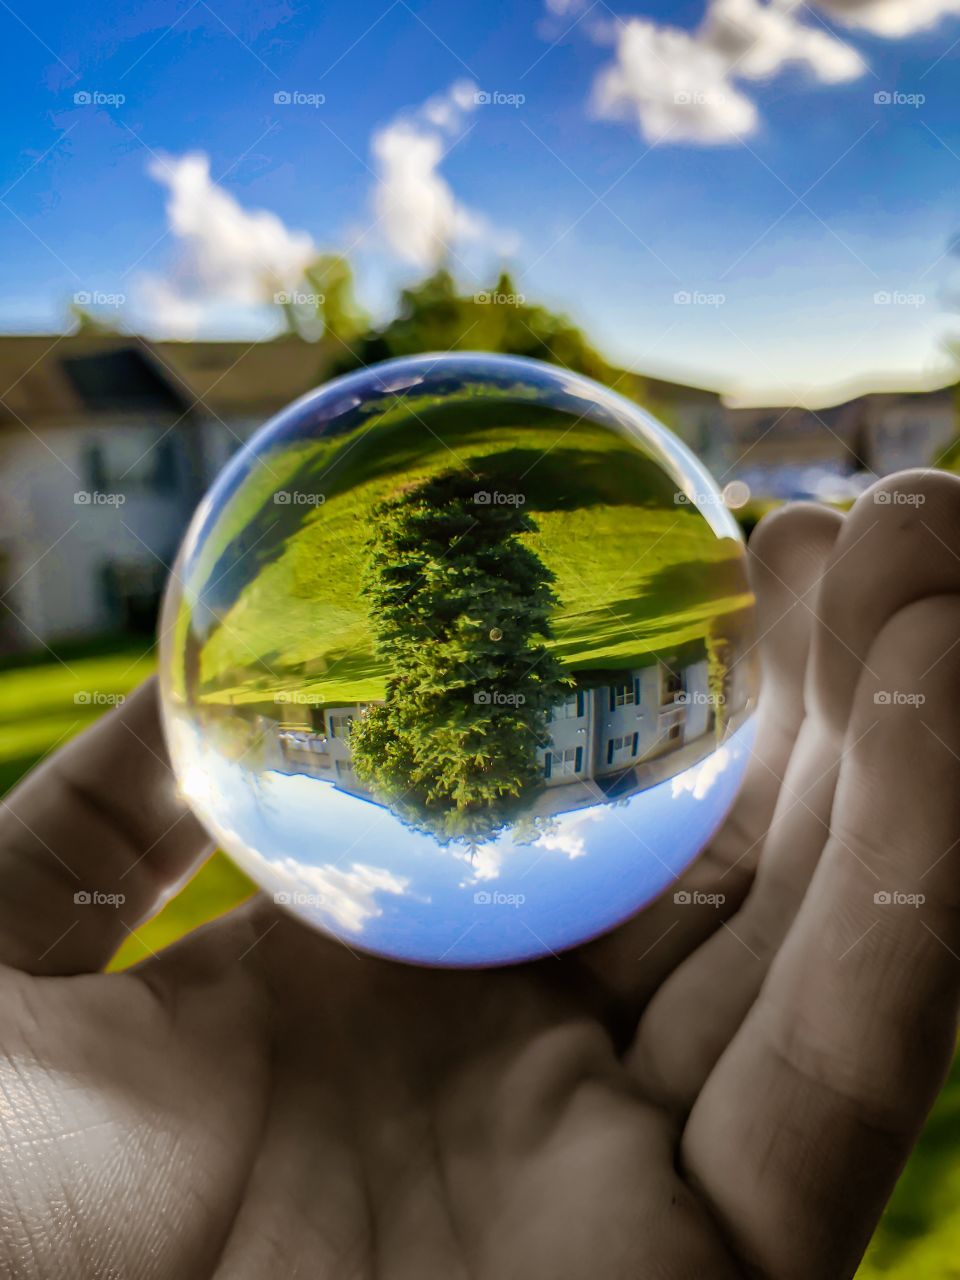 Perspective is key. Look in the crystal ball and you see the world from a different perspective 